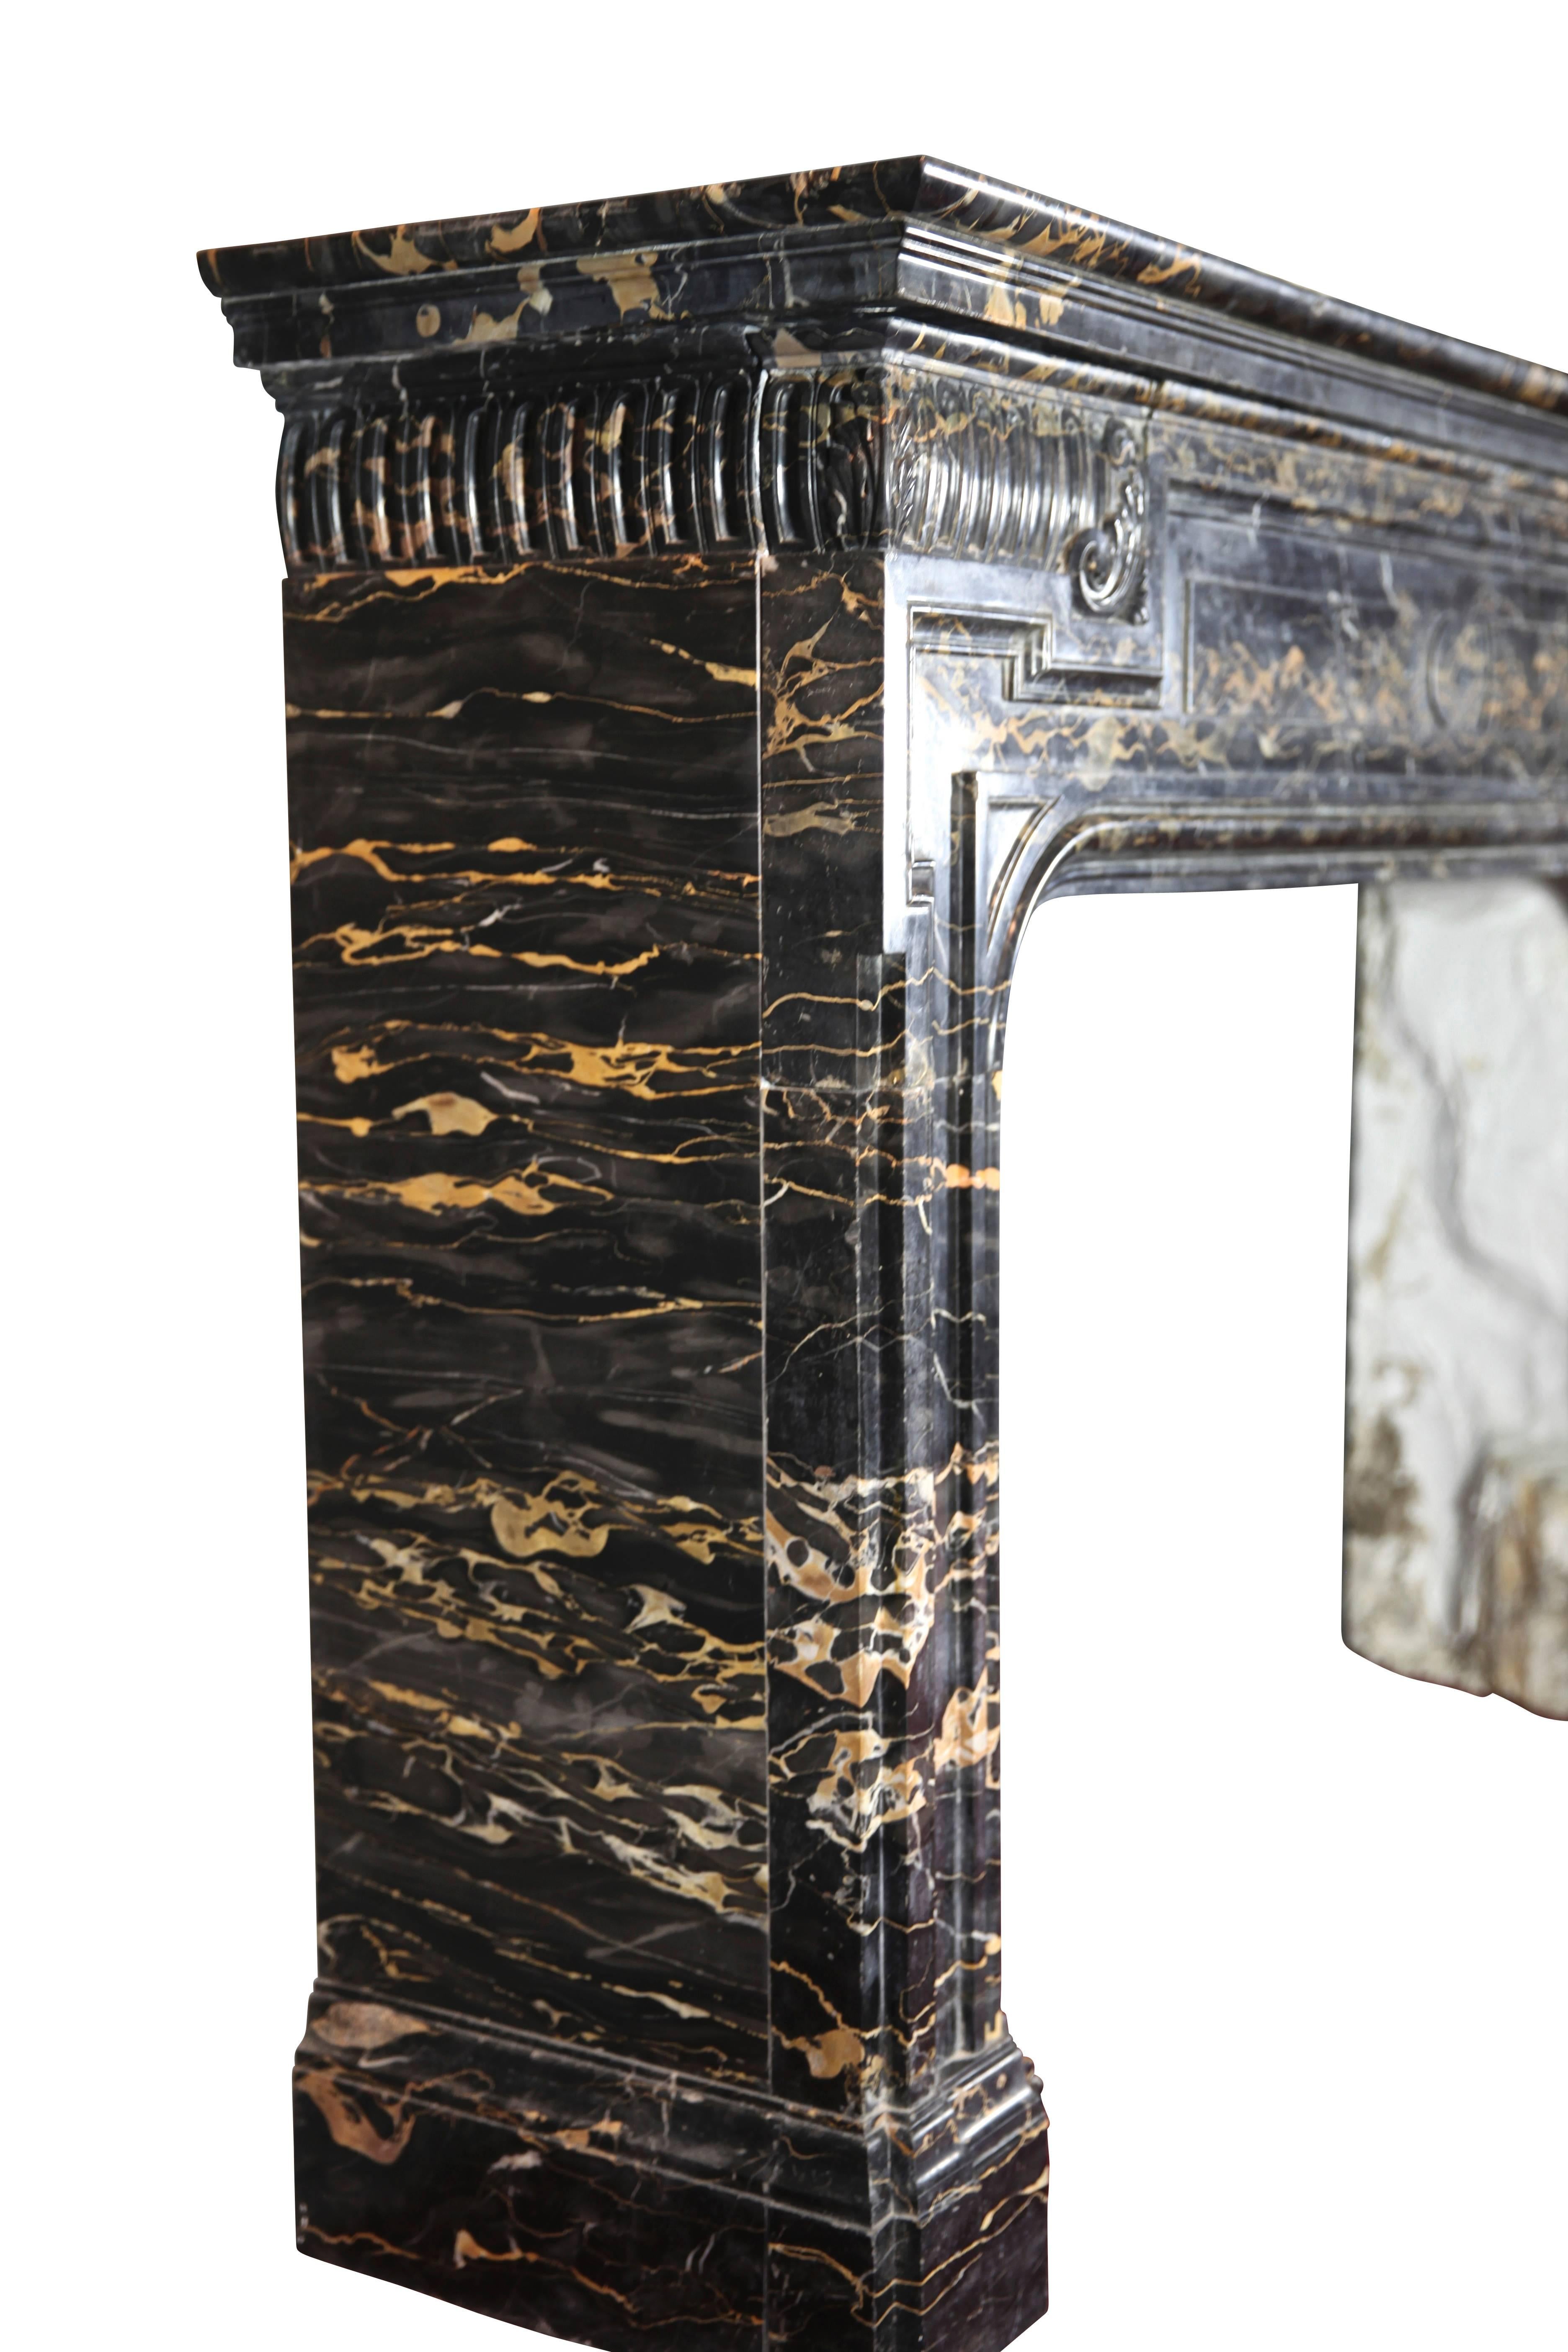 This unique and very high quality Biedermeier antique fireplace surround in Italian Porto d'or marble is one of a kind and bespoke. The marble is quite veined and was used in lot's of Historical landmarks, monuments such as New York Palace hotel, Le